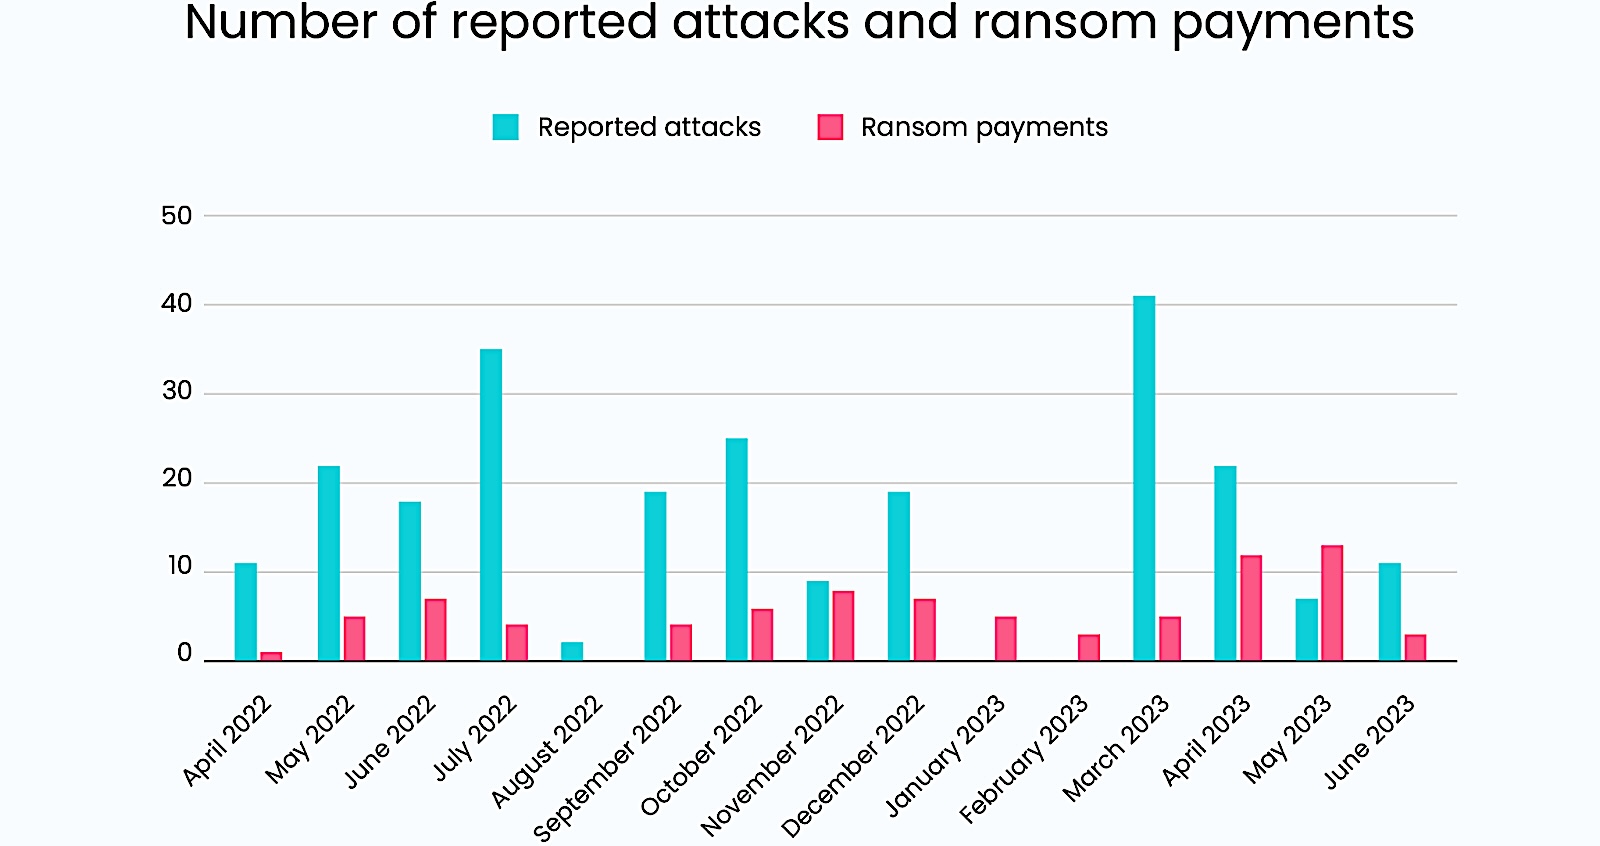 Number of attacks and bribe payments